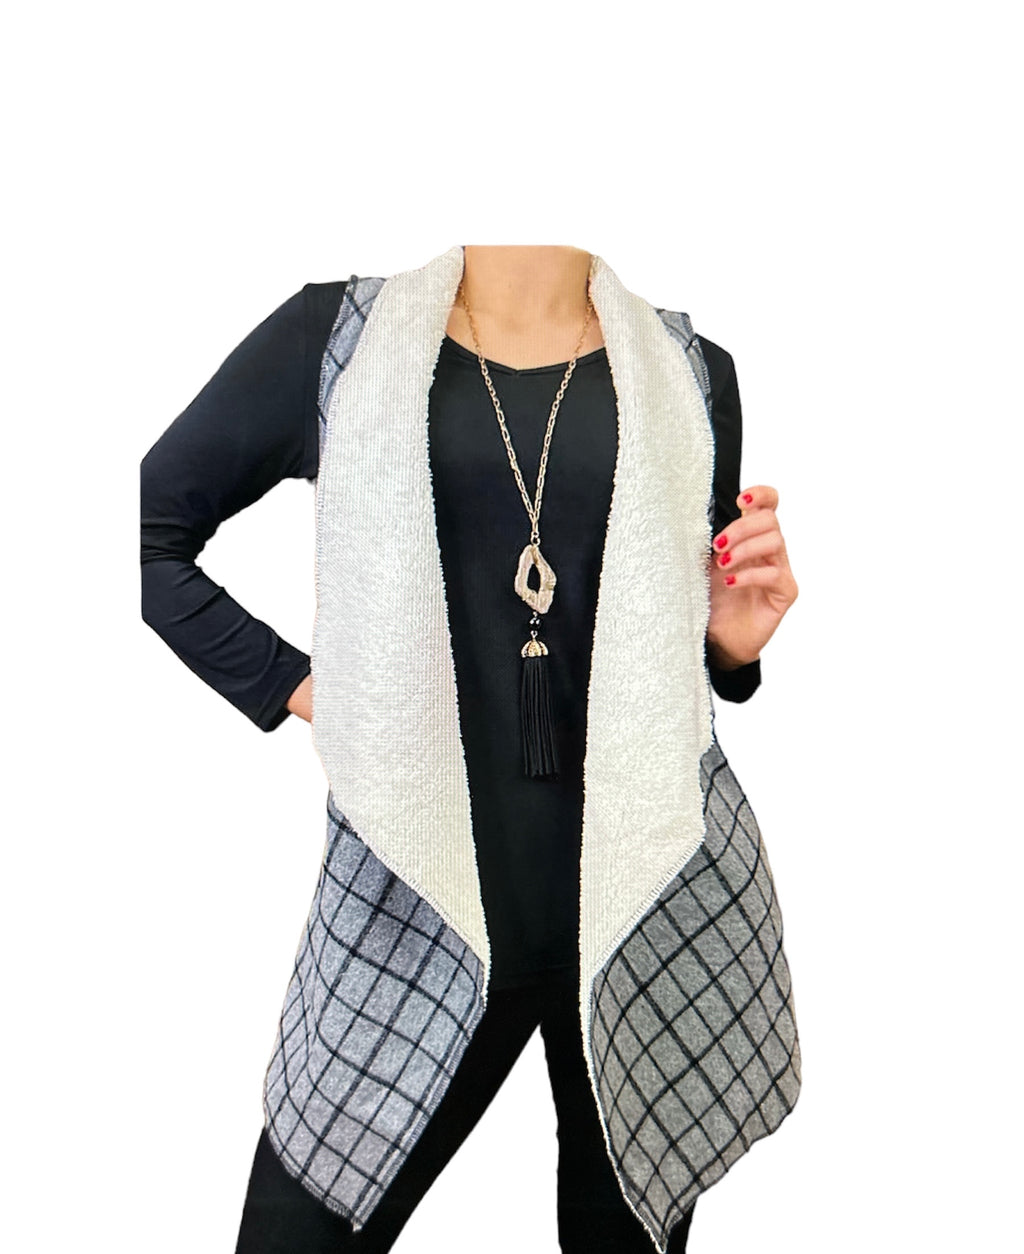 outerwear vest features a Gray and Black plaid pattern and is Sherpa lined. It is specifically designed to fit Plus-1X sized women and includes pockets for storage